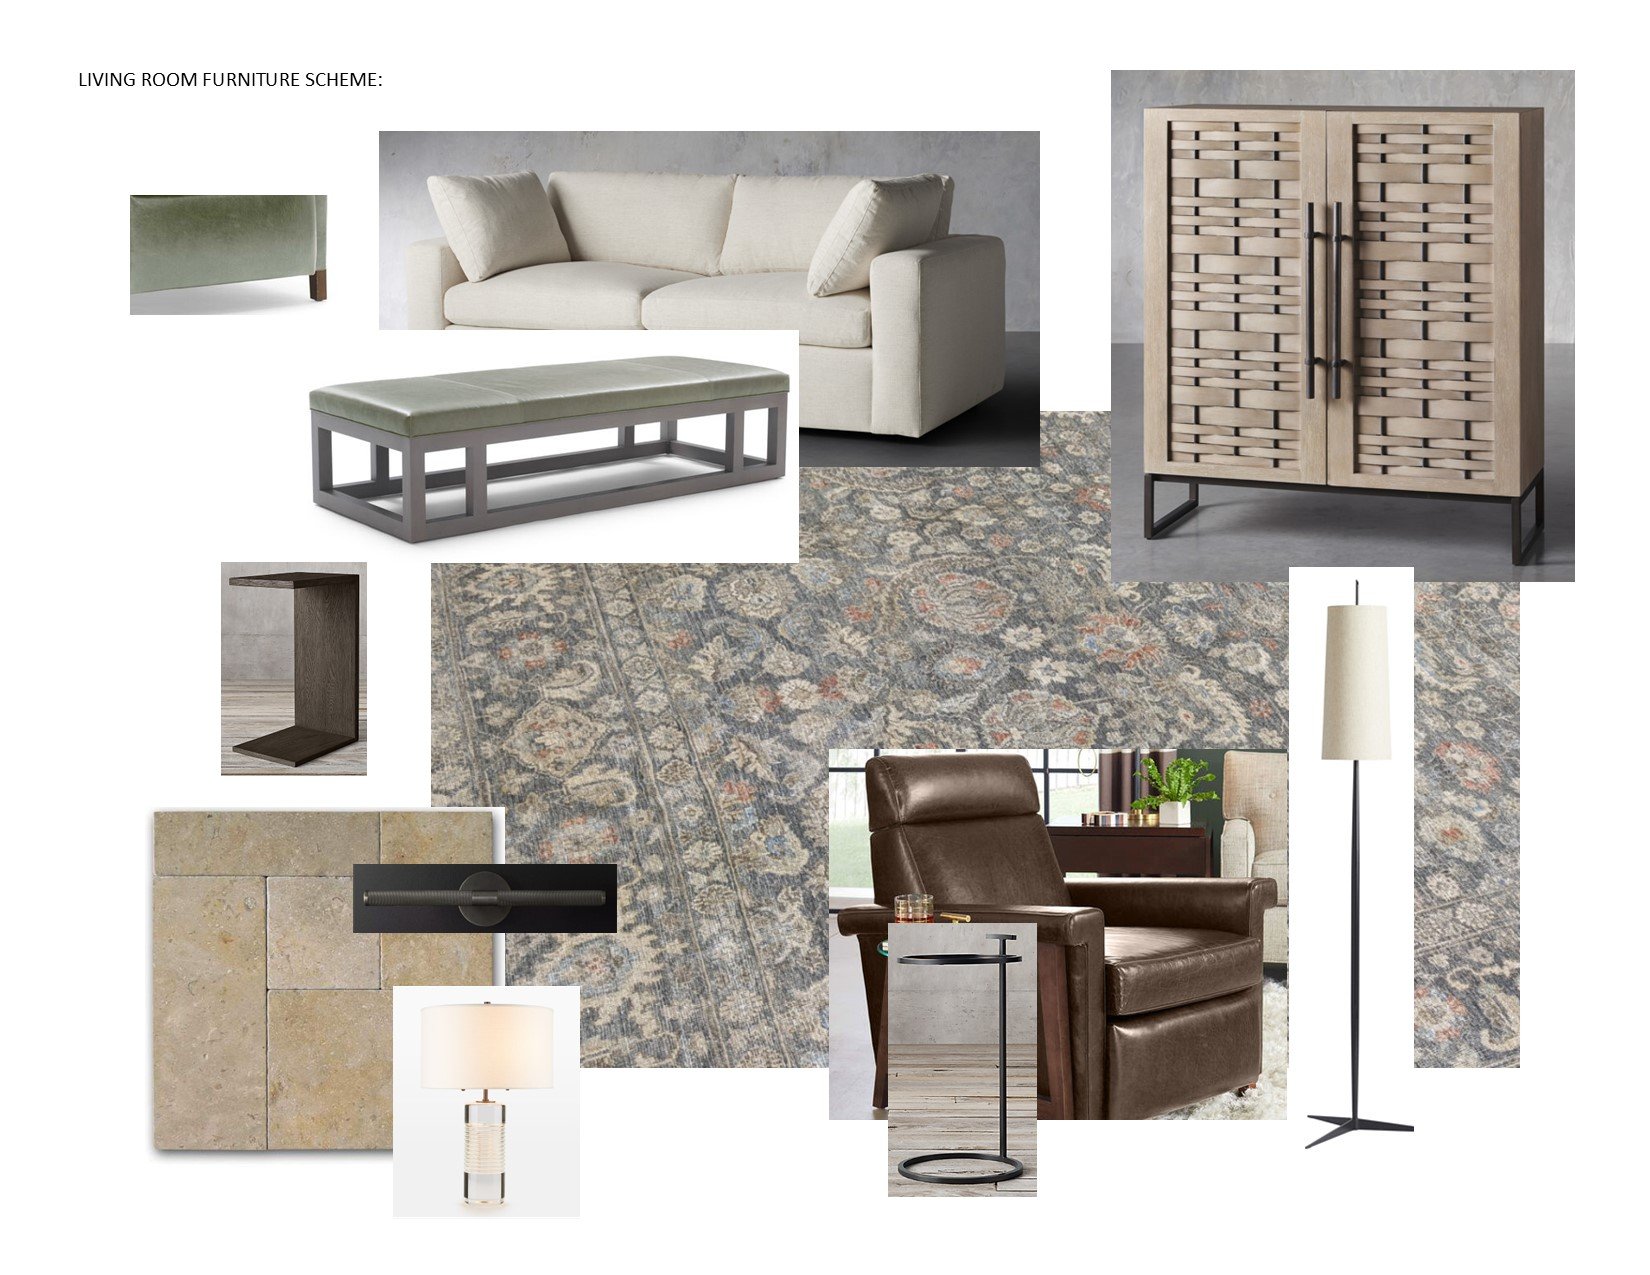 Young_Updated family room furniture scheme.jpg